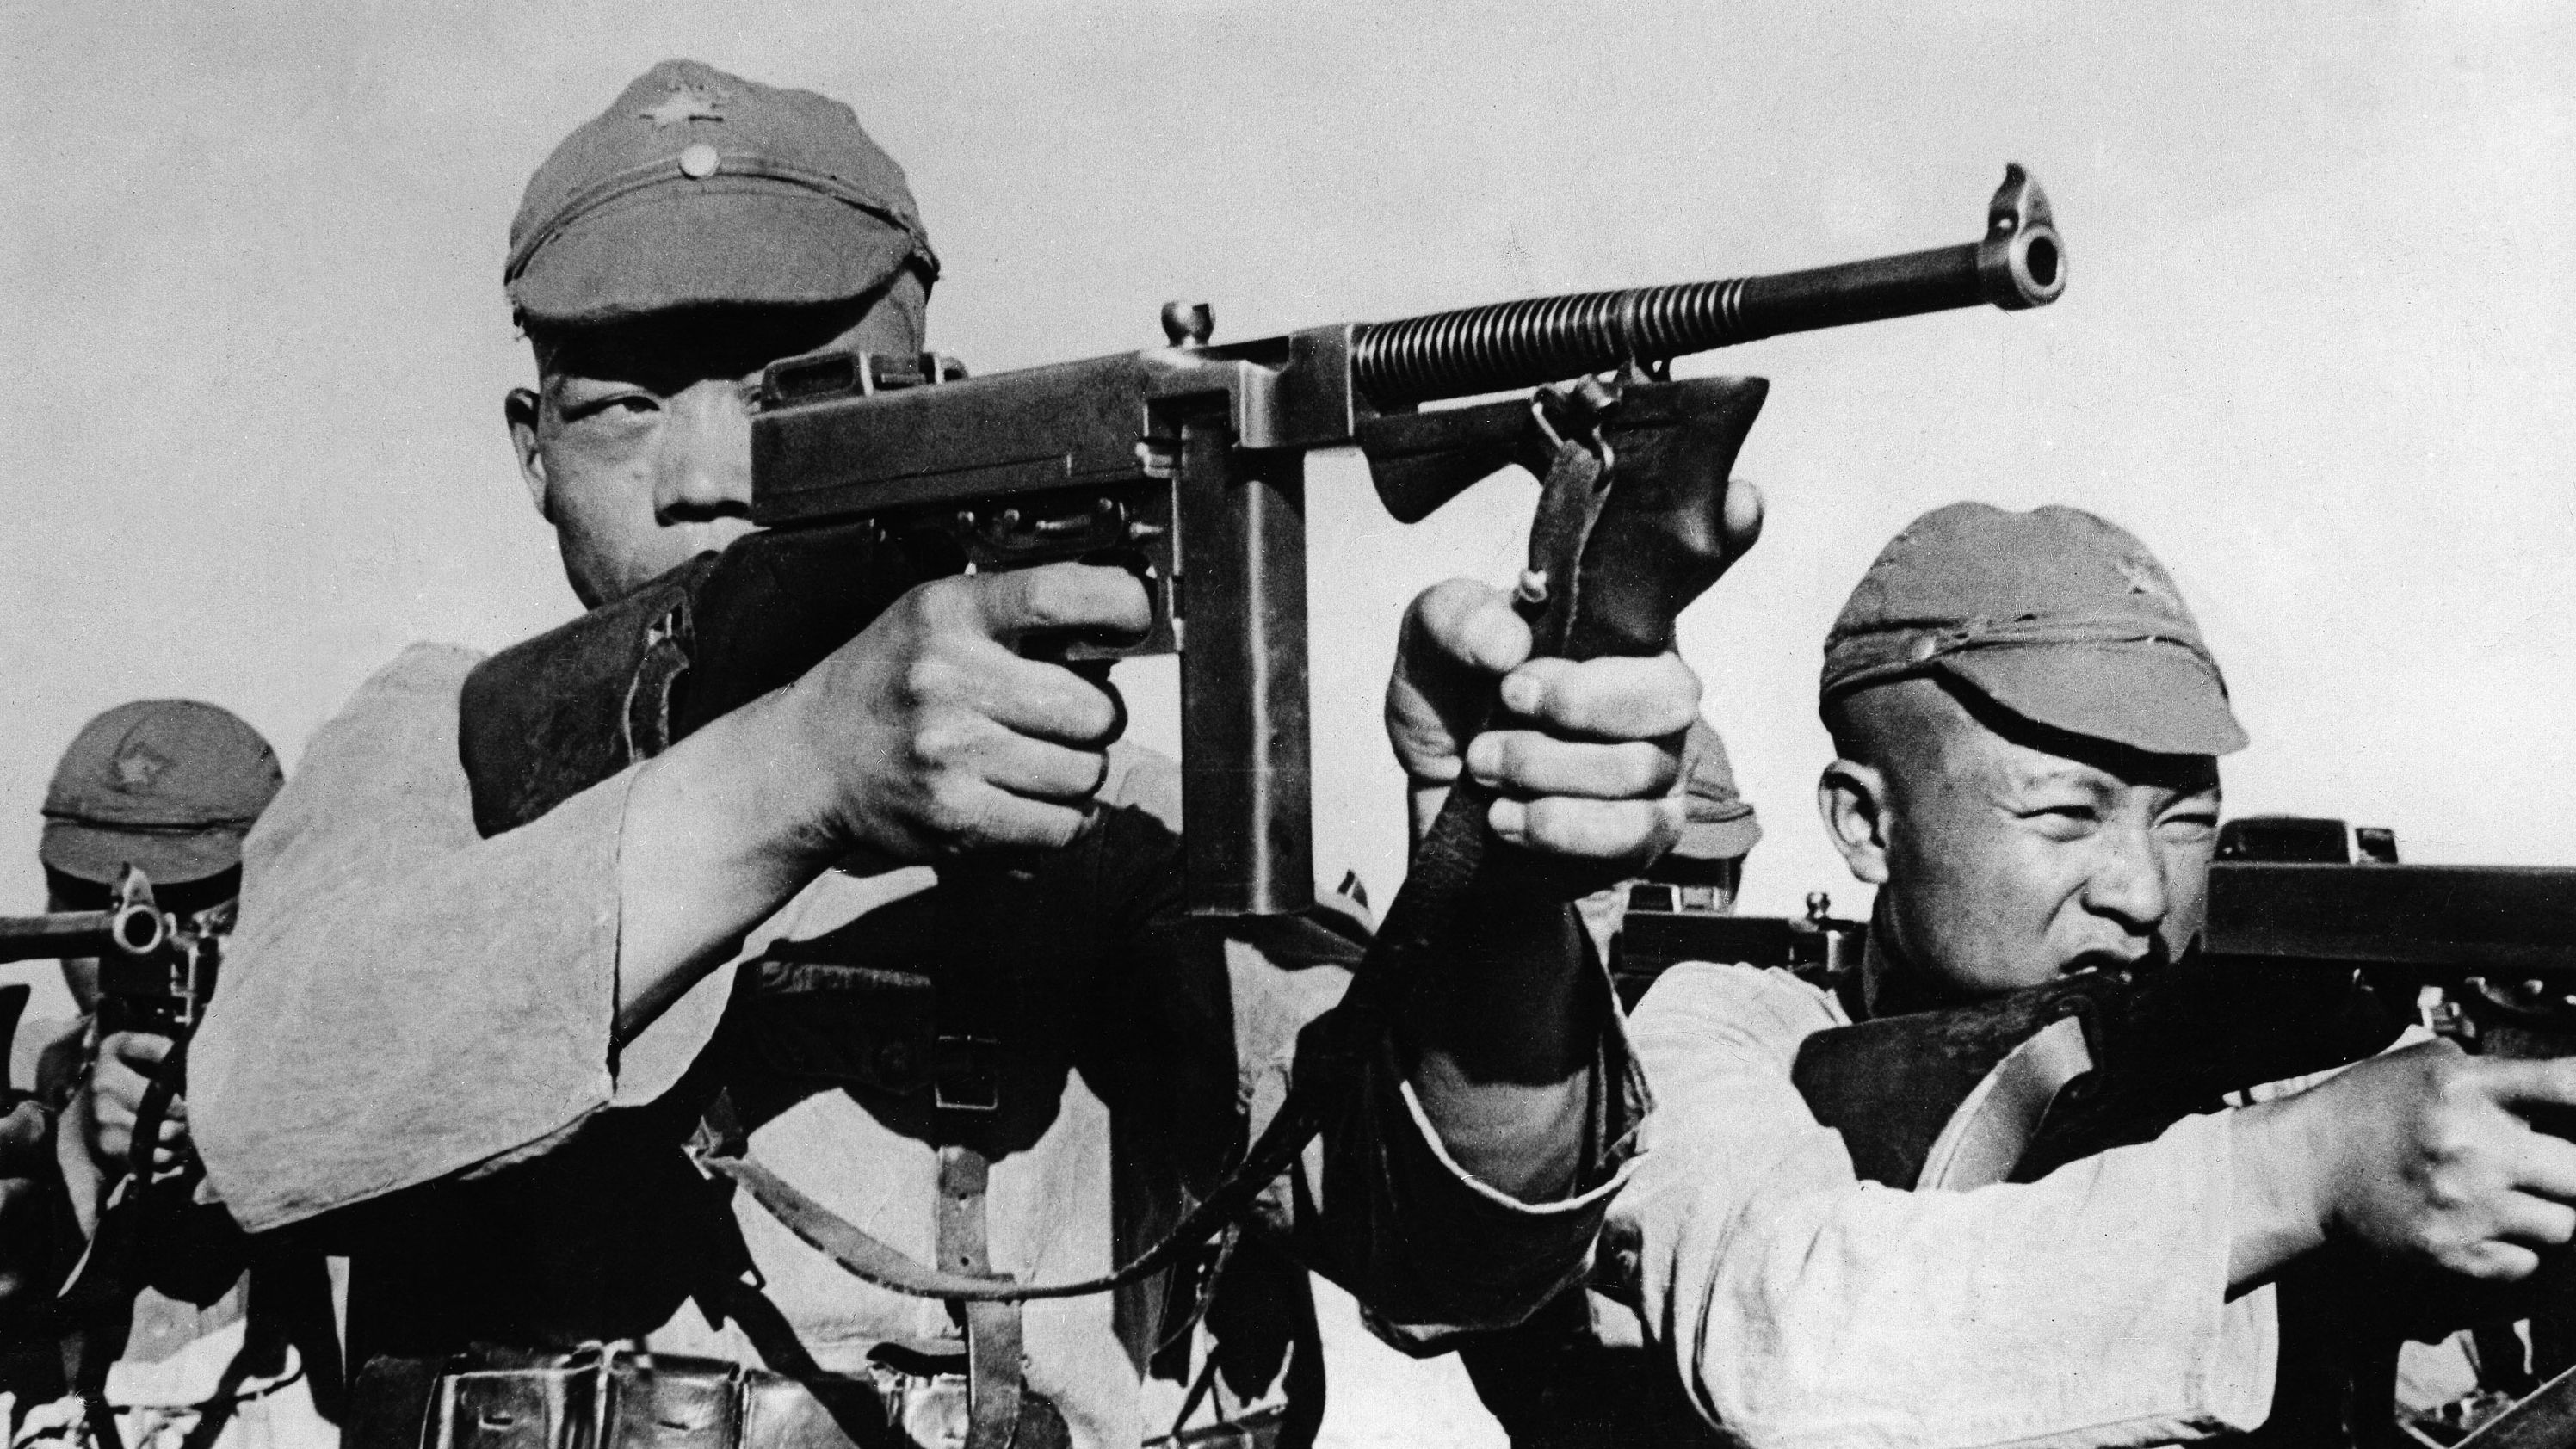 Chinese Communist soldiers conduct a military exercise in 1937. That year, the second war broke out between China and Japan over the expansion of Japan's influence in China. The communists pledged their support to the Nationalist government to defeat the Japanese. Their union fell apart in 1945 after Japan surrendered to the Allies, ending World War II.